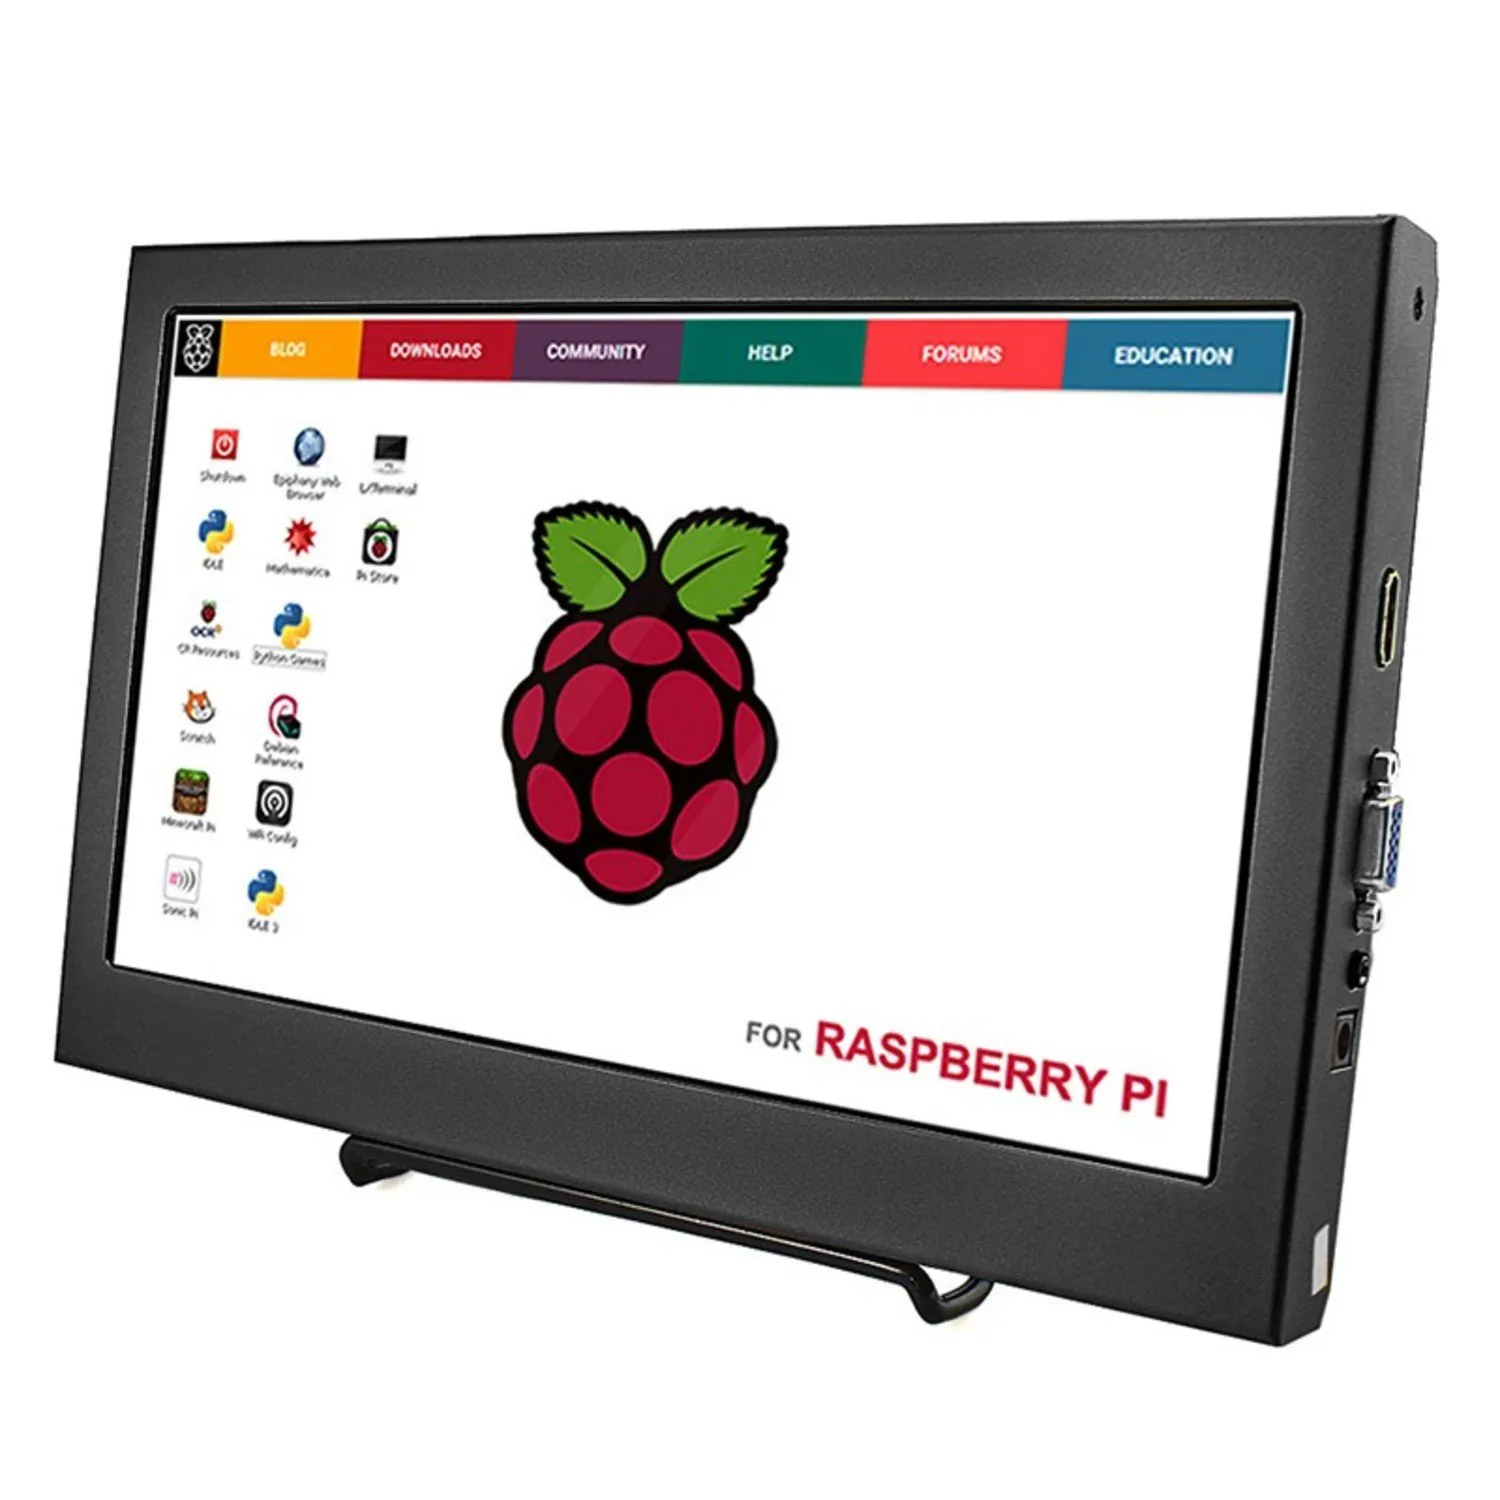 Photo of 11.6 Inch 1920x1080 HDMI 1080P LED Display for Raspberry Pi